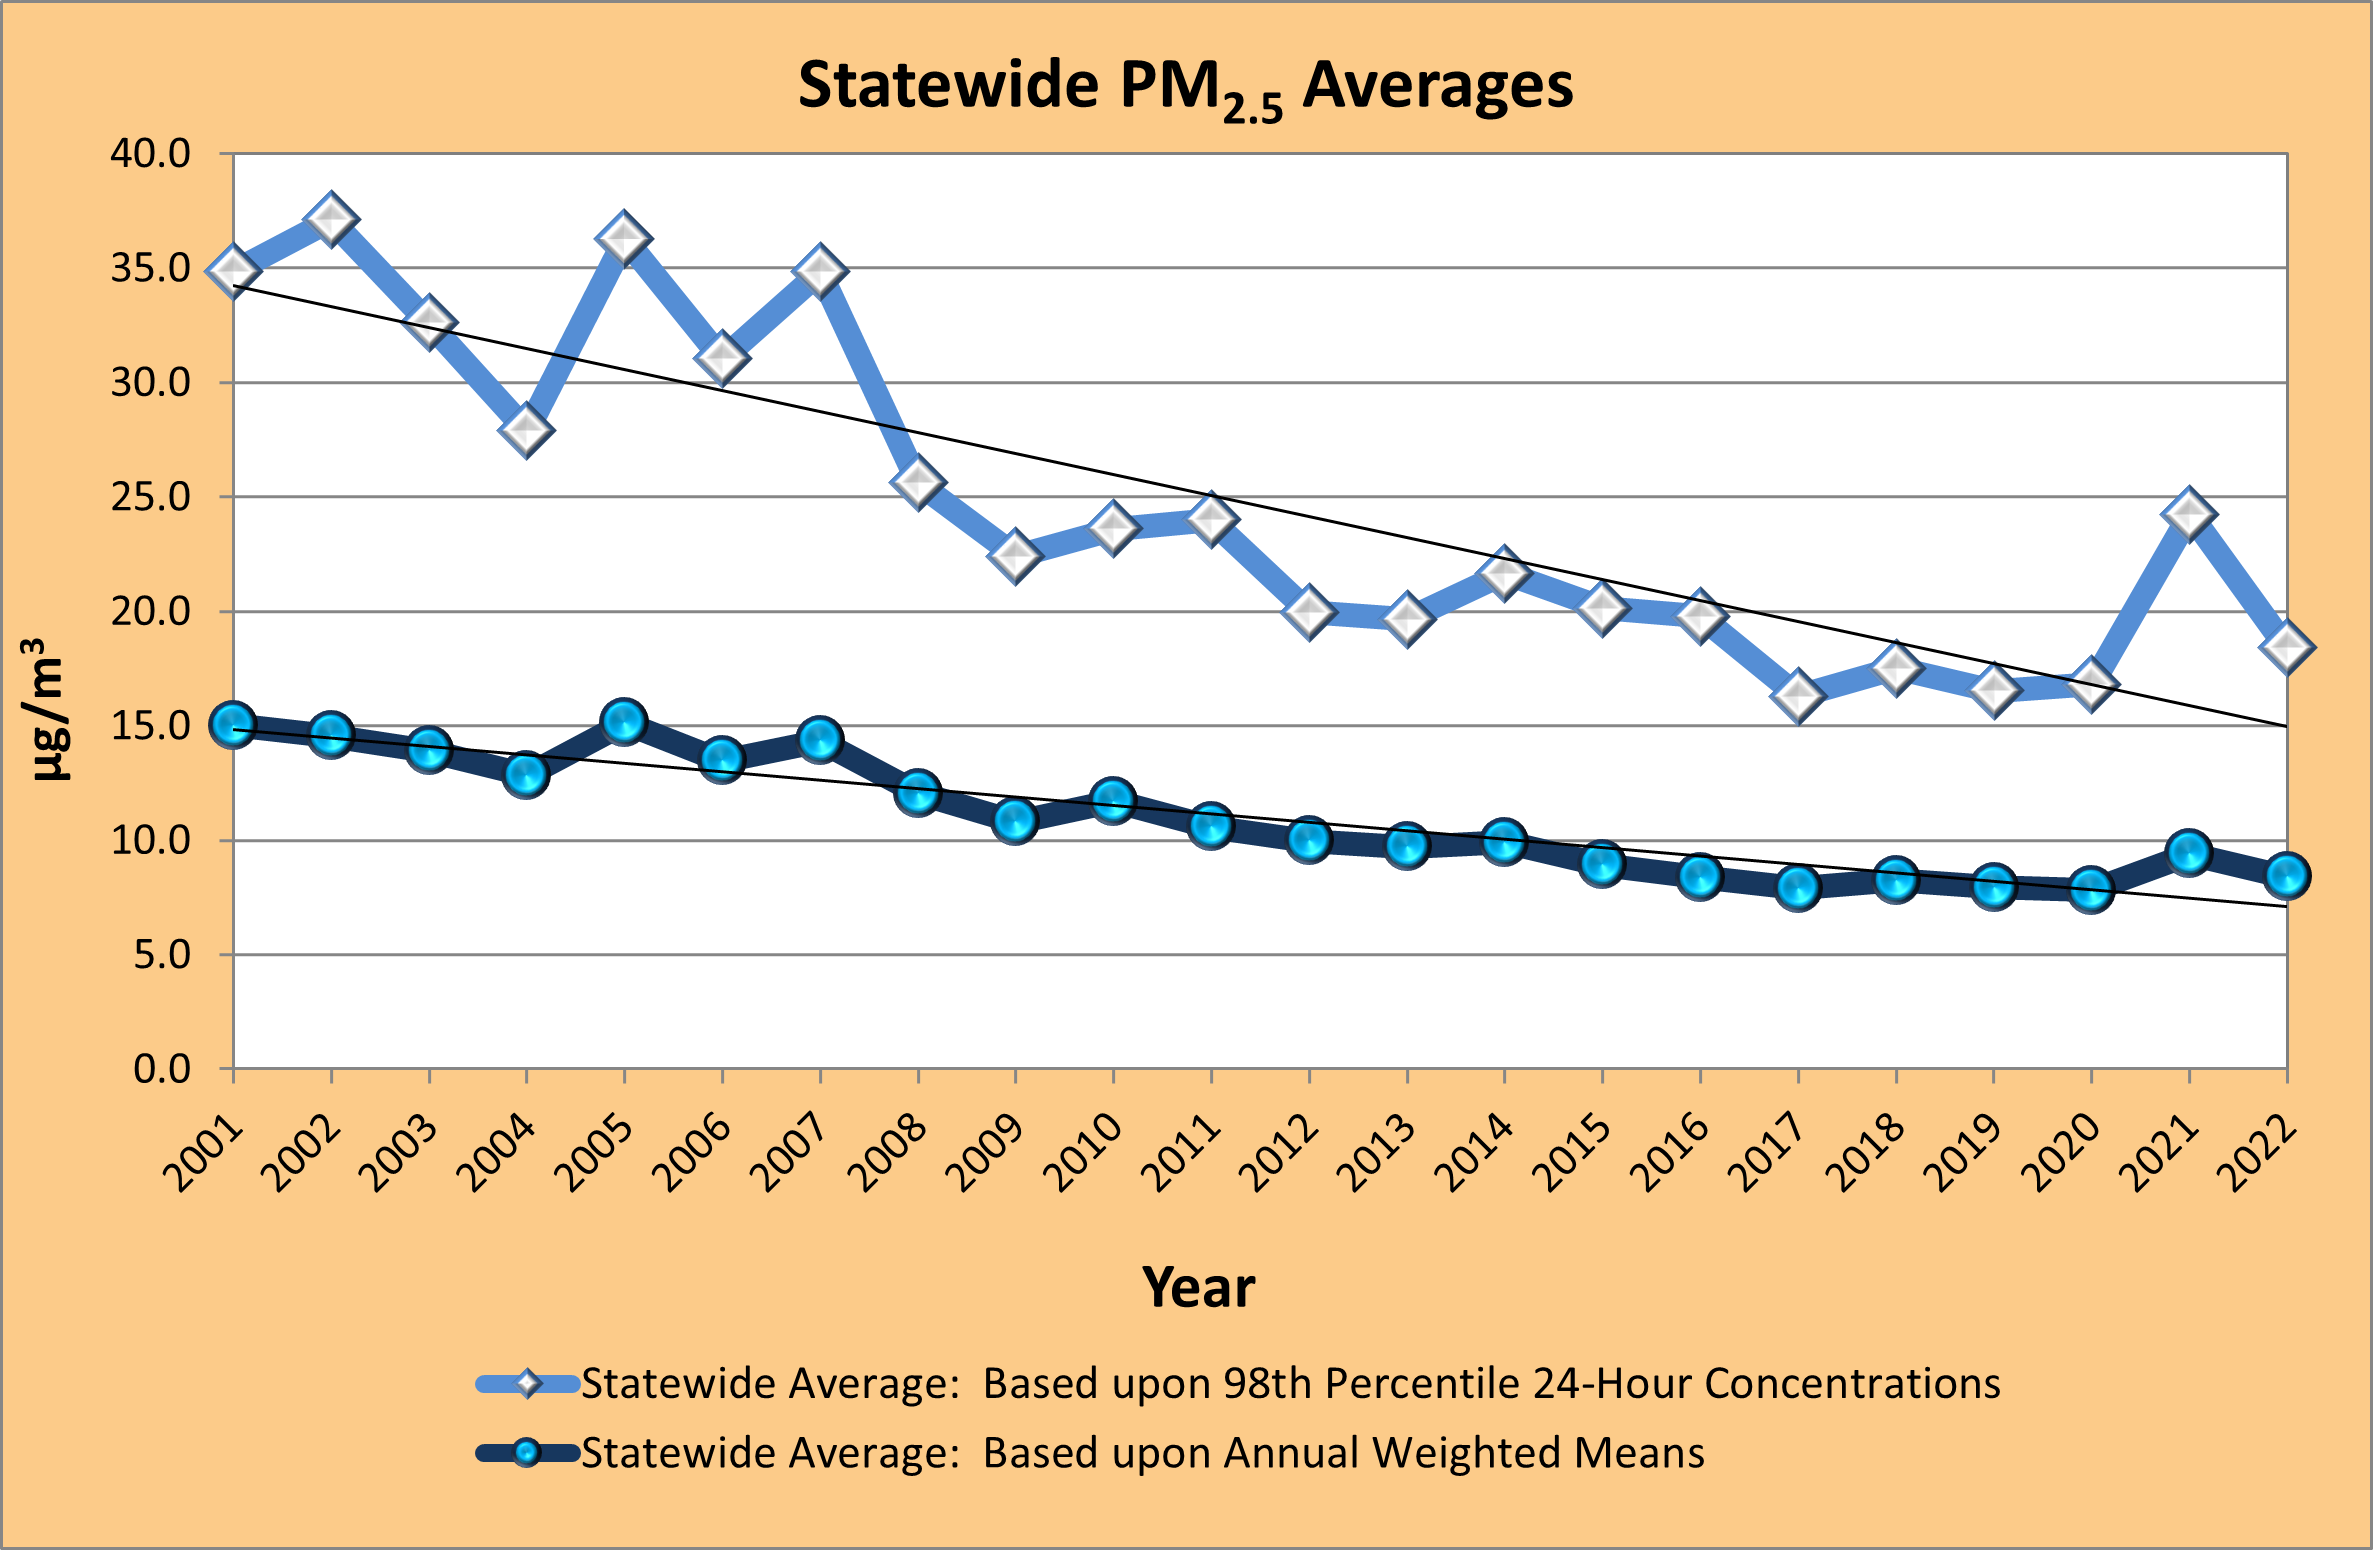 Ambient air monitoring data for fine particulate matter averaged across the state